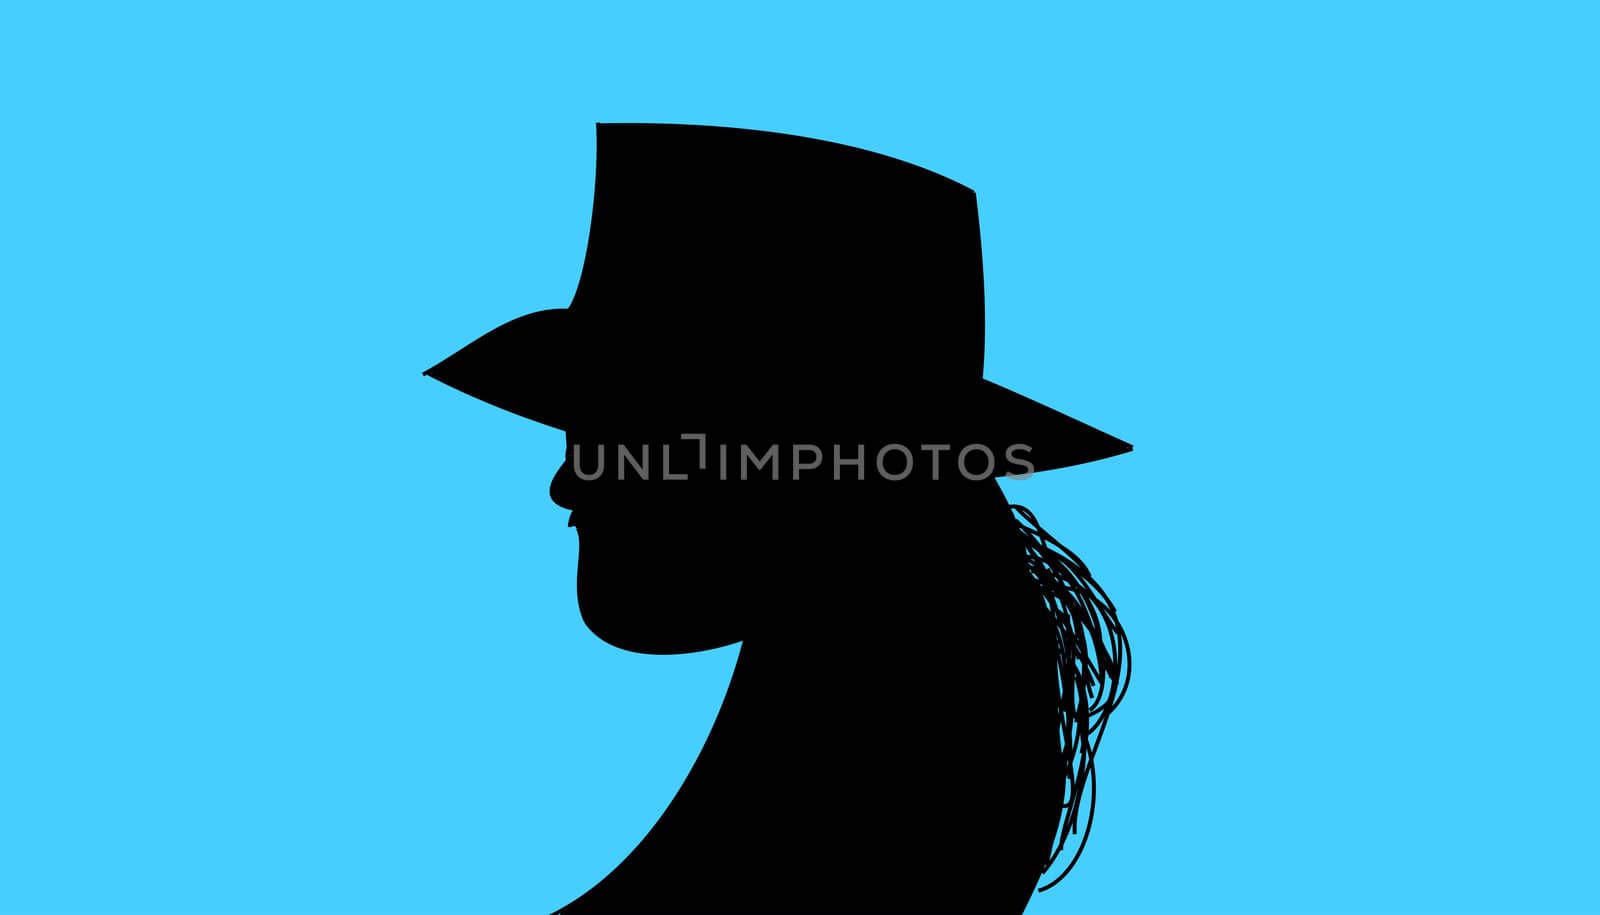 the silhouette on blue background